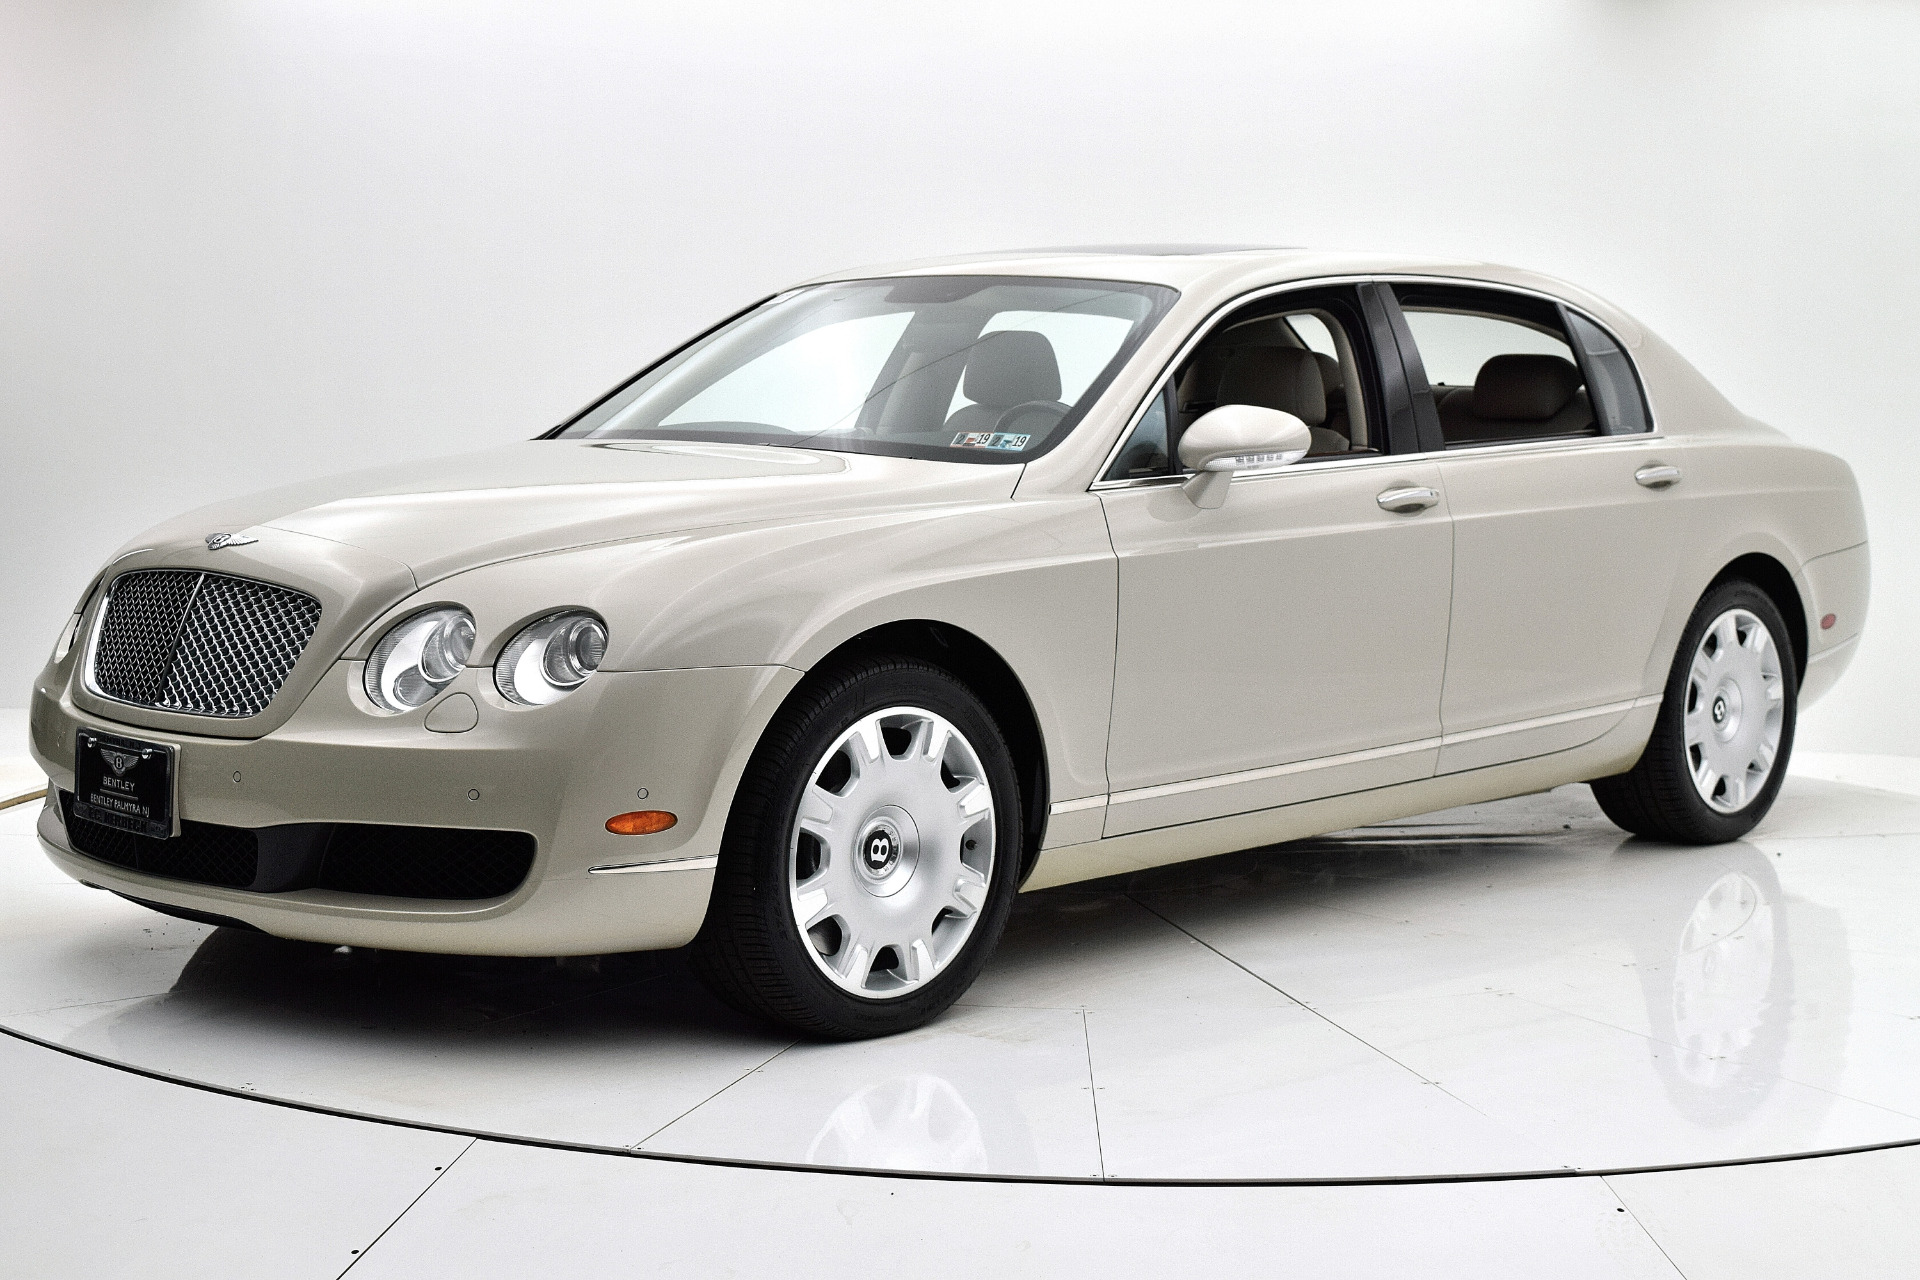 Used 2008 Bentley Continental Flying Spur Flying Spur for sale Sold at Bentley Palmyra N.J. in Palmyra NJ 08065 2